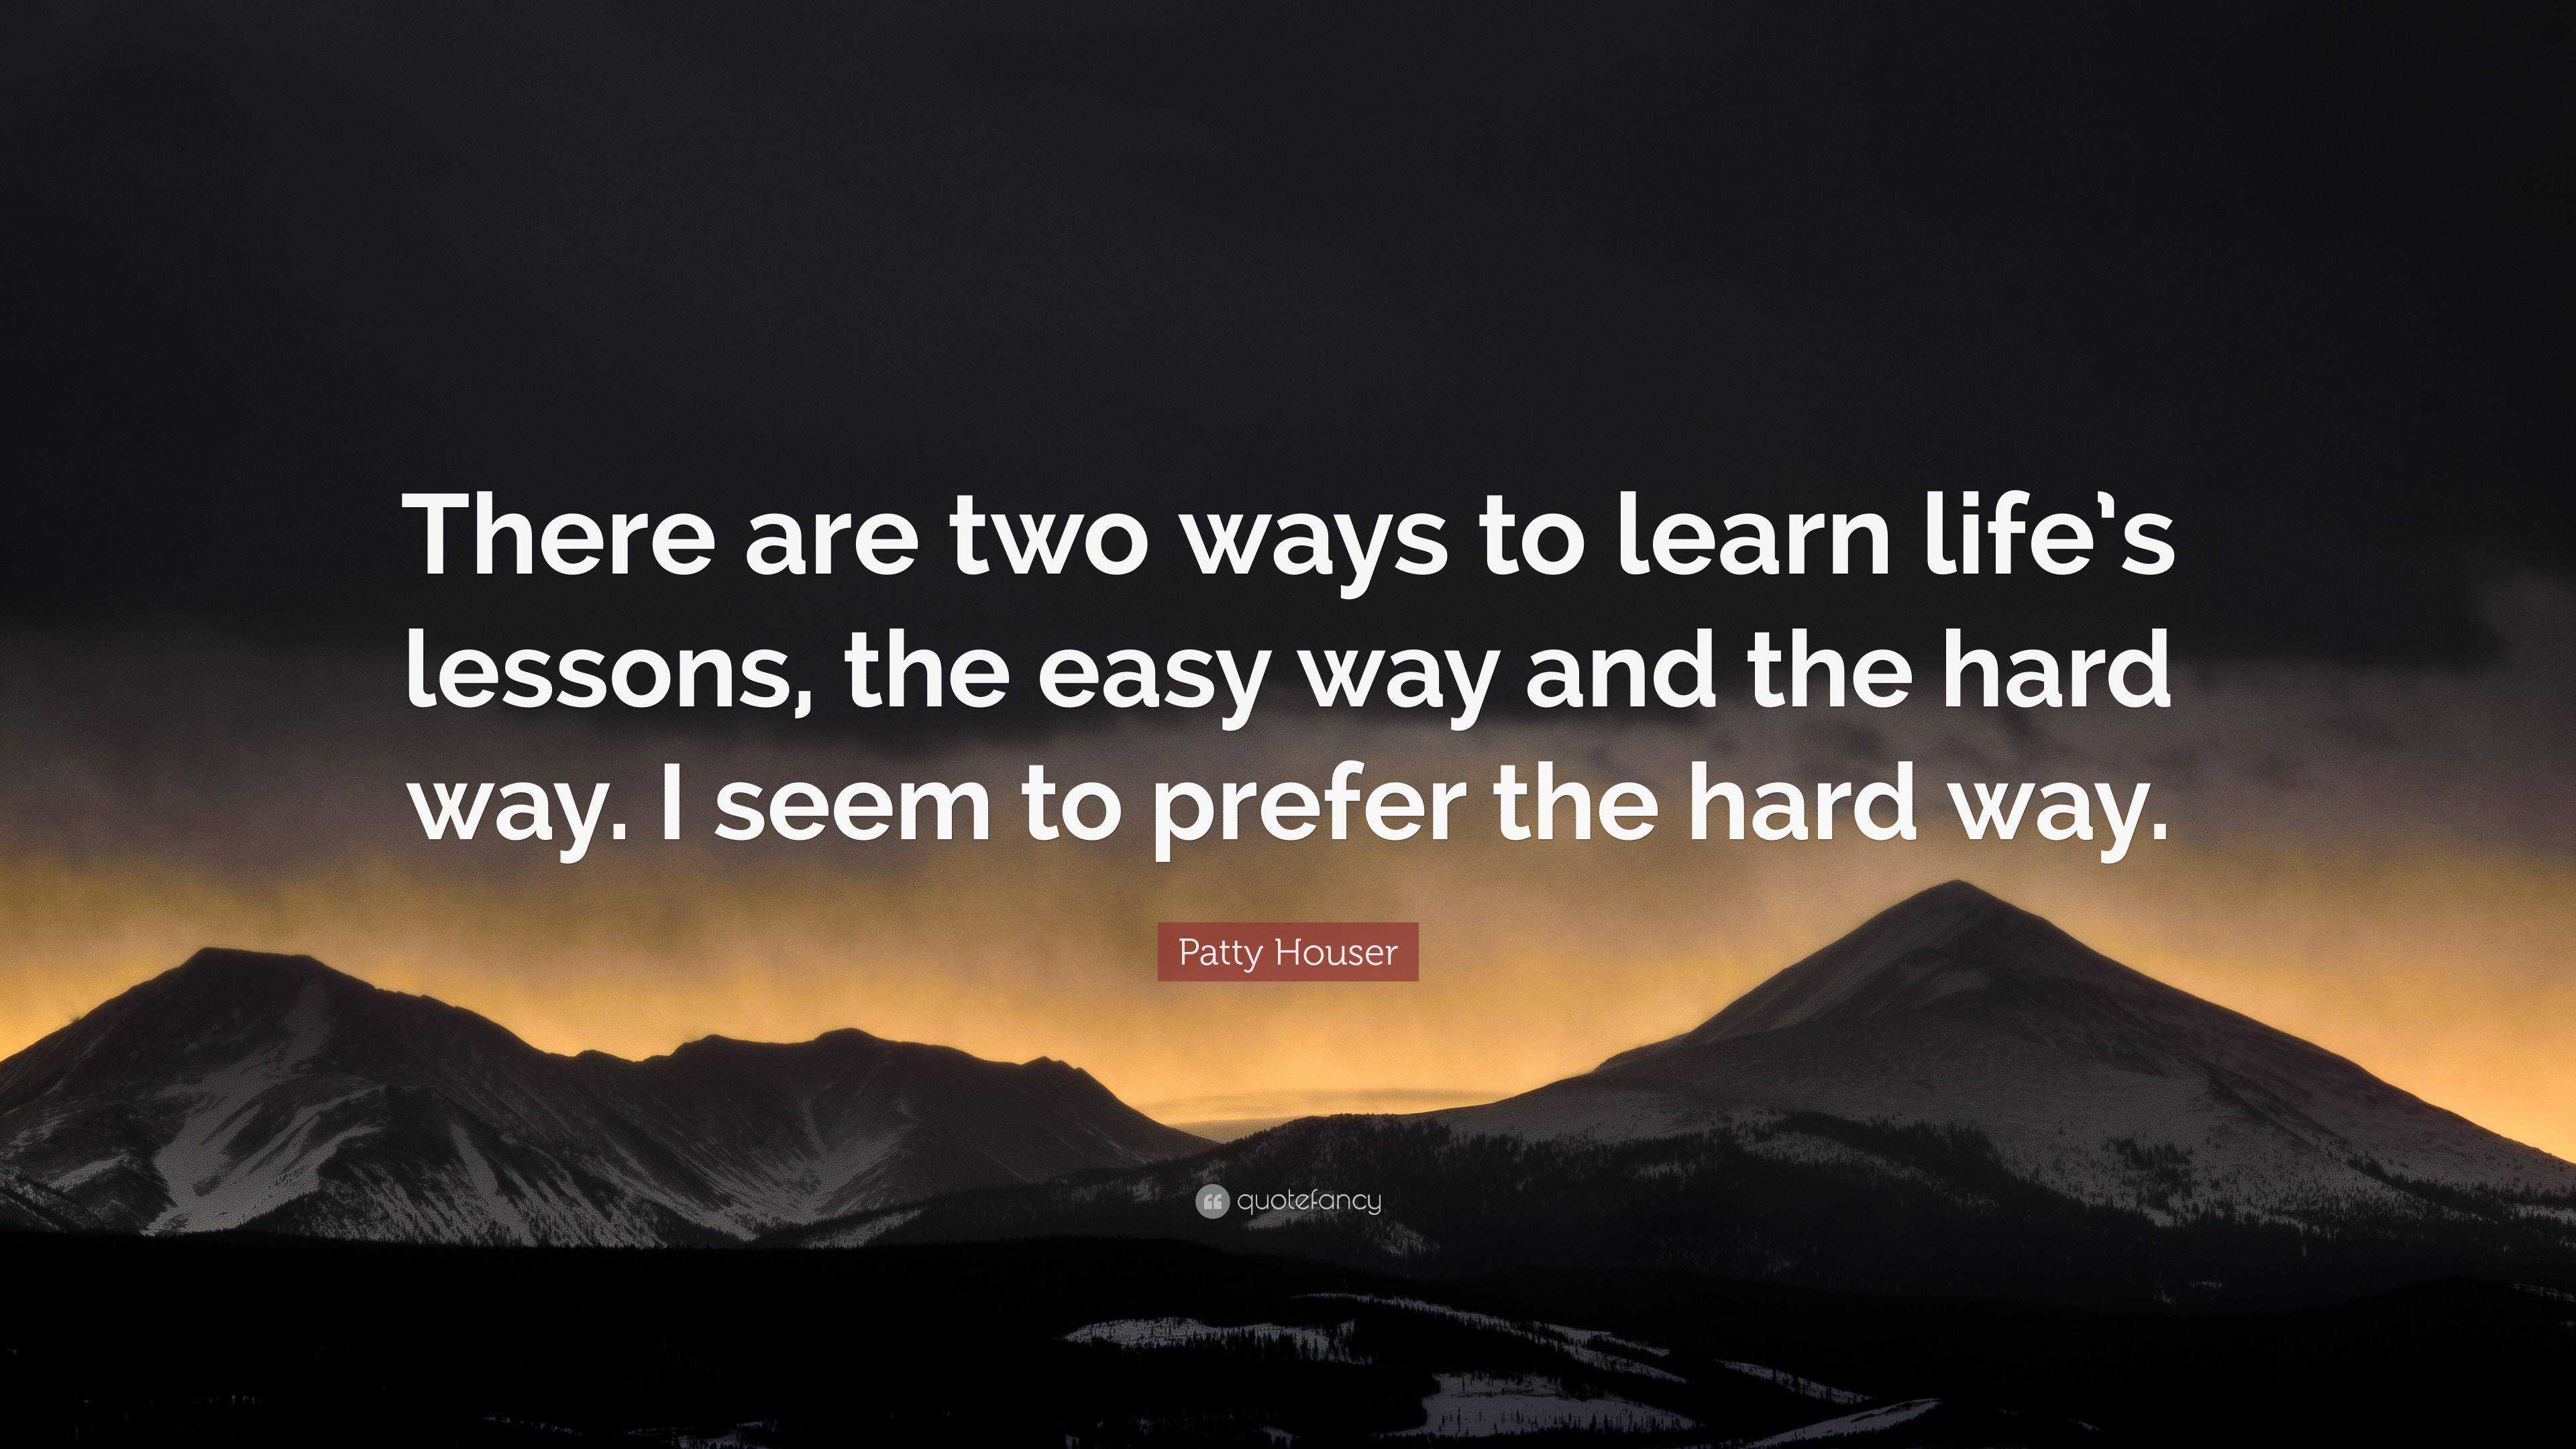 Learn the easy way or the hard way, it's better to learn the hard